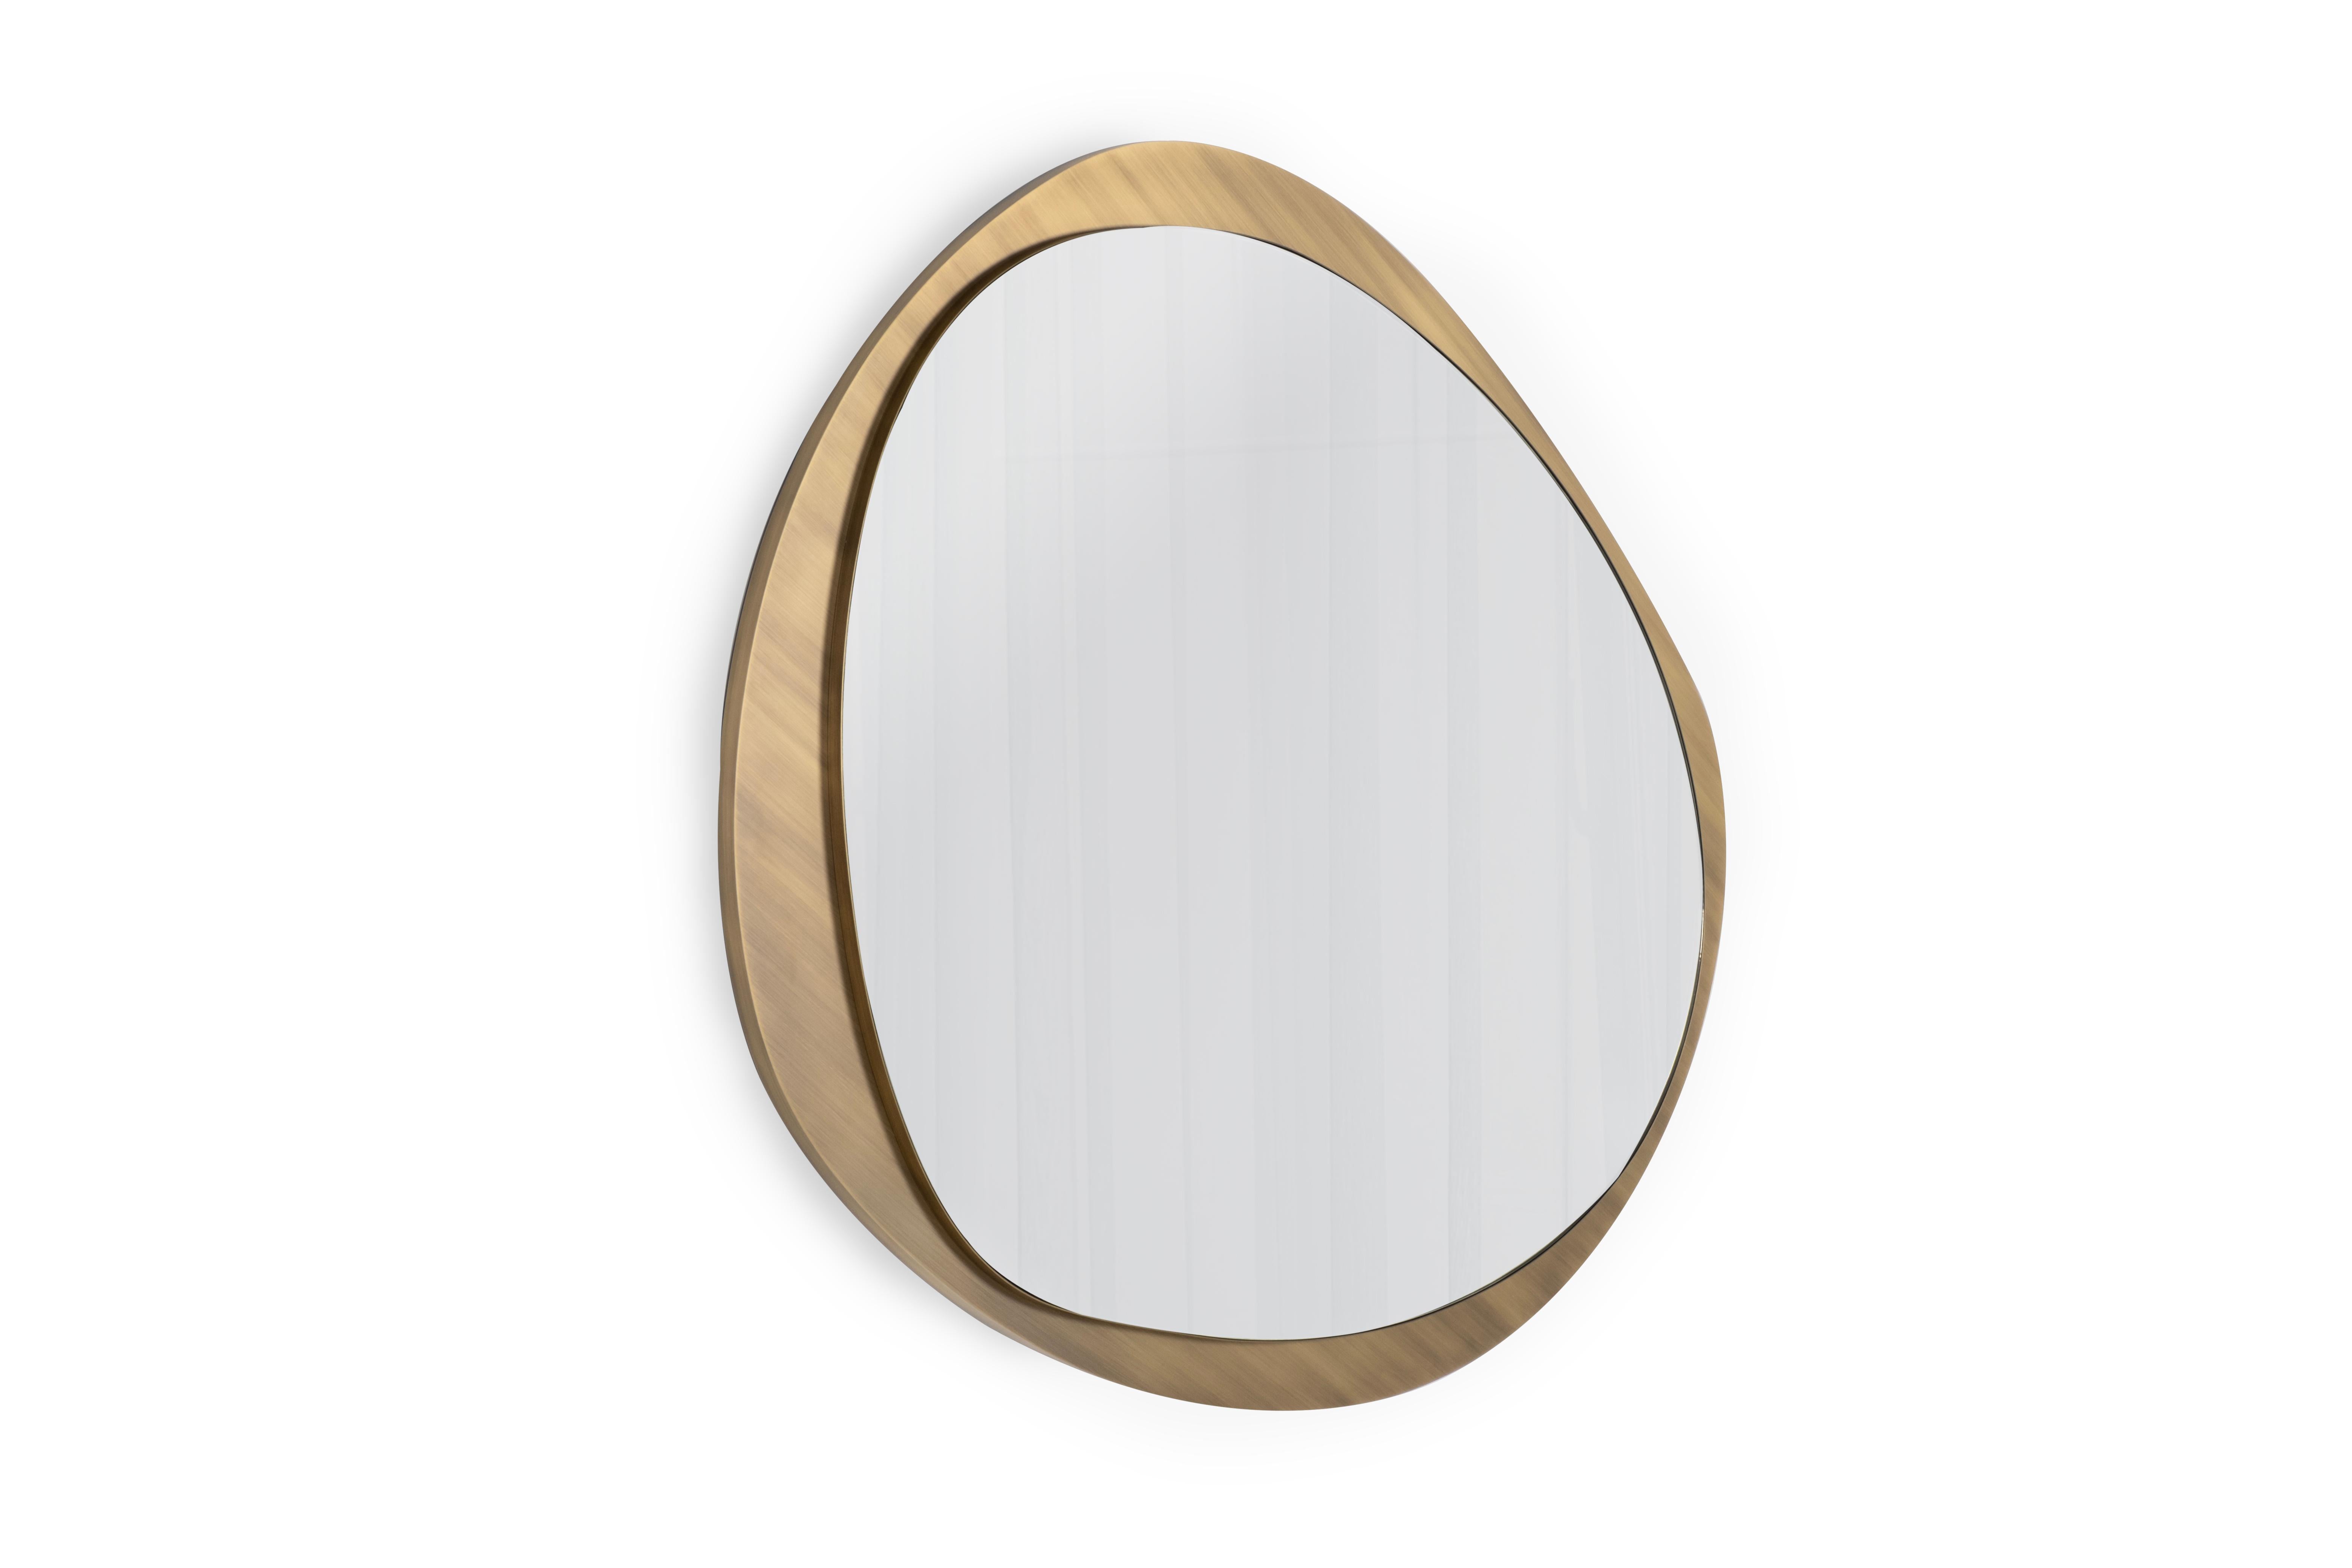 Brushed Modern Wall Mirror, Oxidized Brass, Handmade in Portugal by Greenapple For Sale